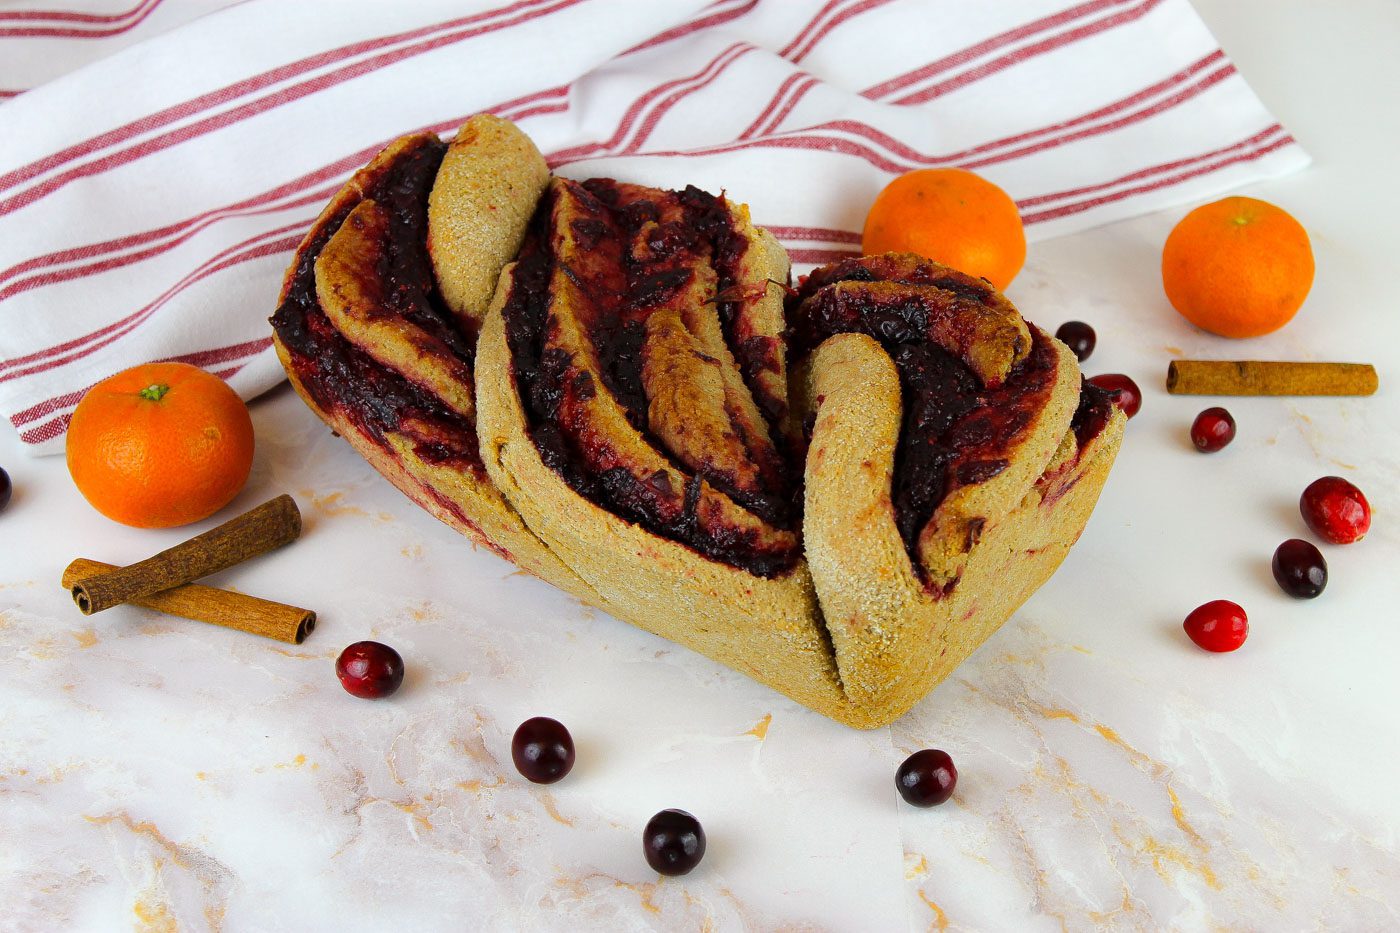 loaf of cinnamon bread surrounded by a red striped tea towel, oranges and cranberries